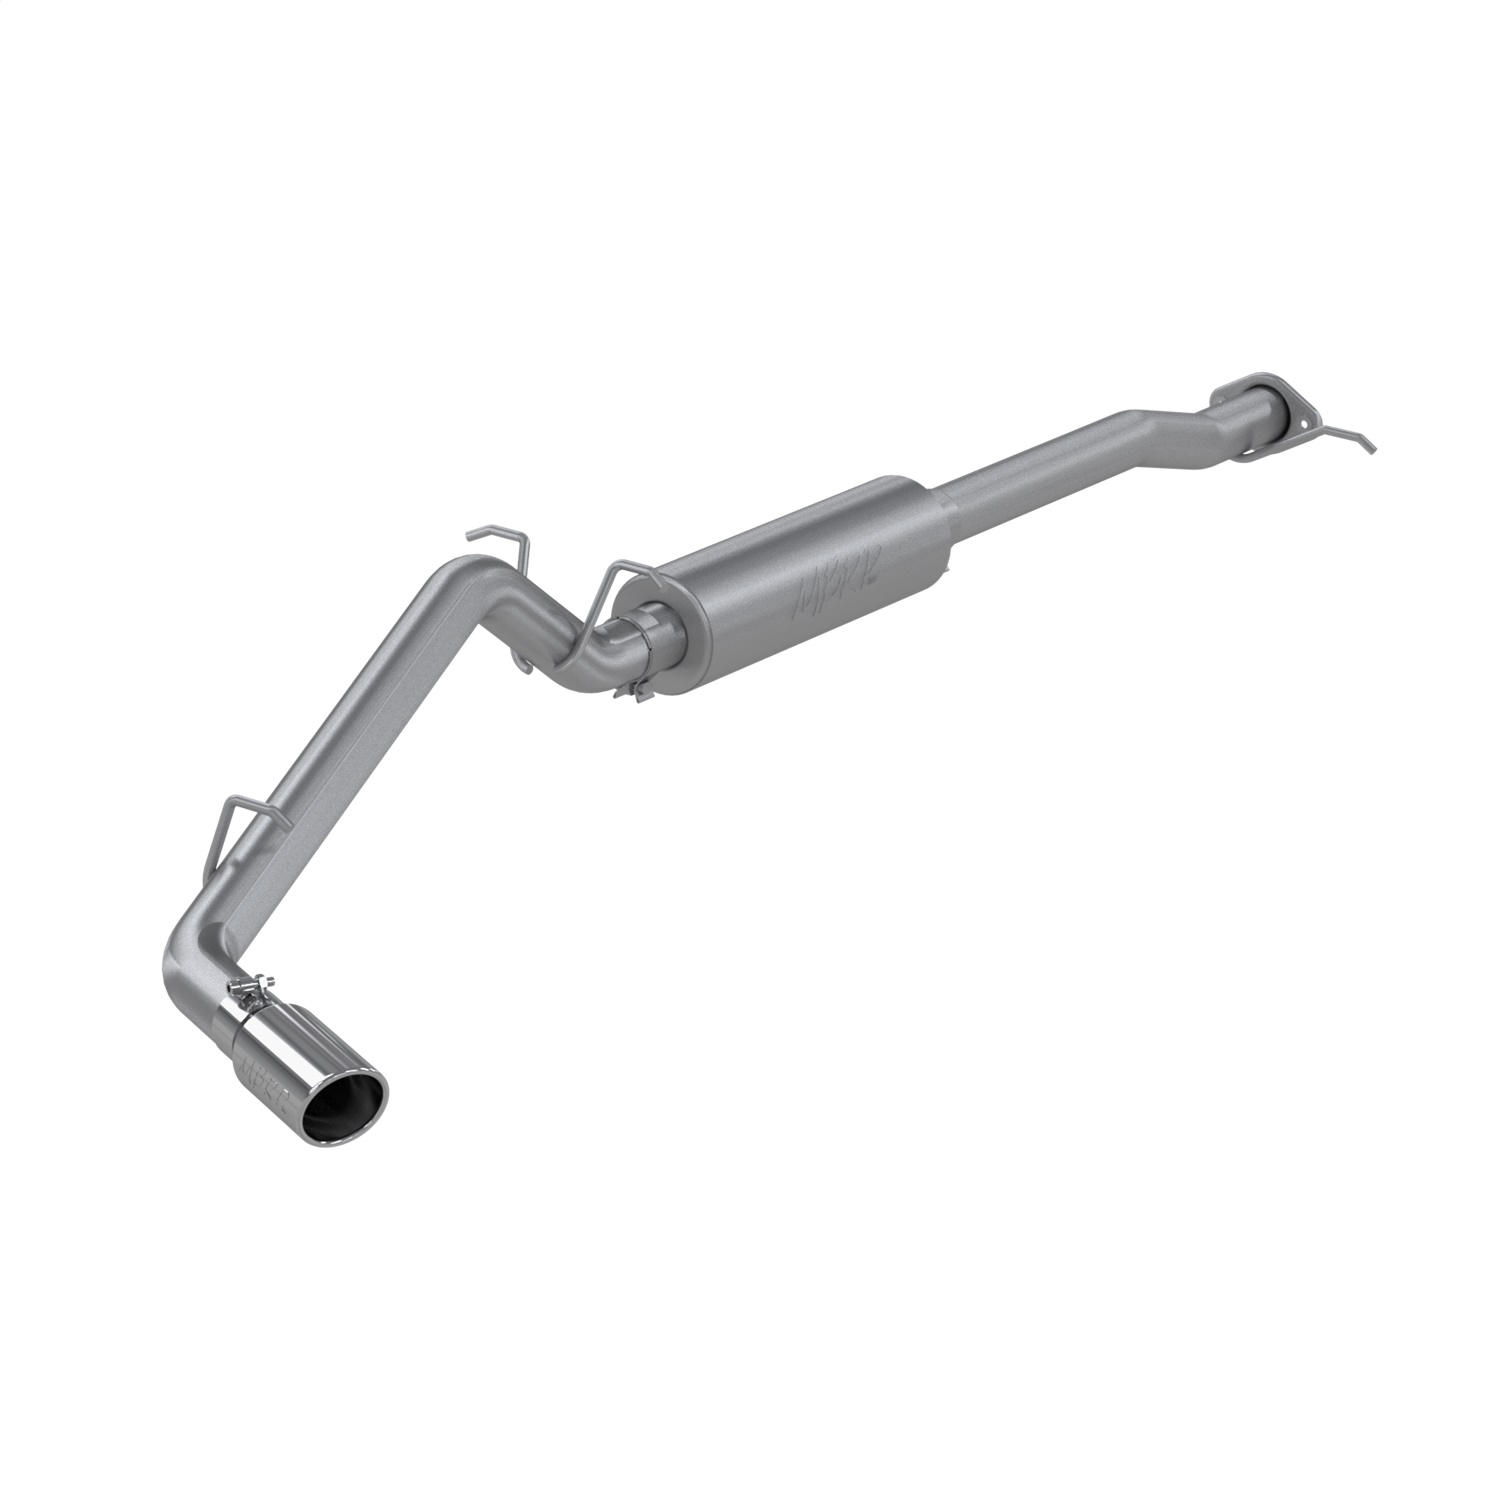 MBRP Exhaust S5090304 Armor Pro Cat Back Exhaust System Fits Canyon Colorado